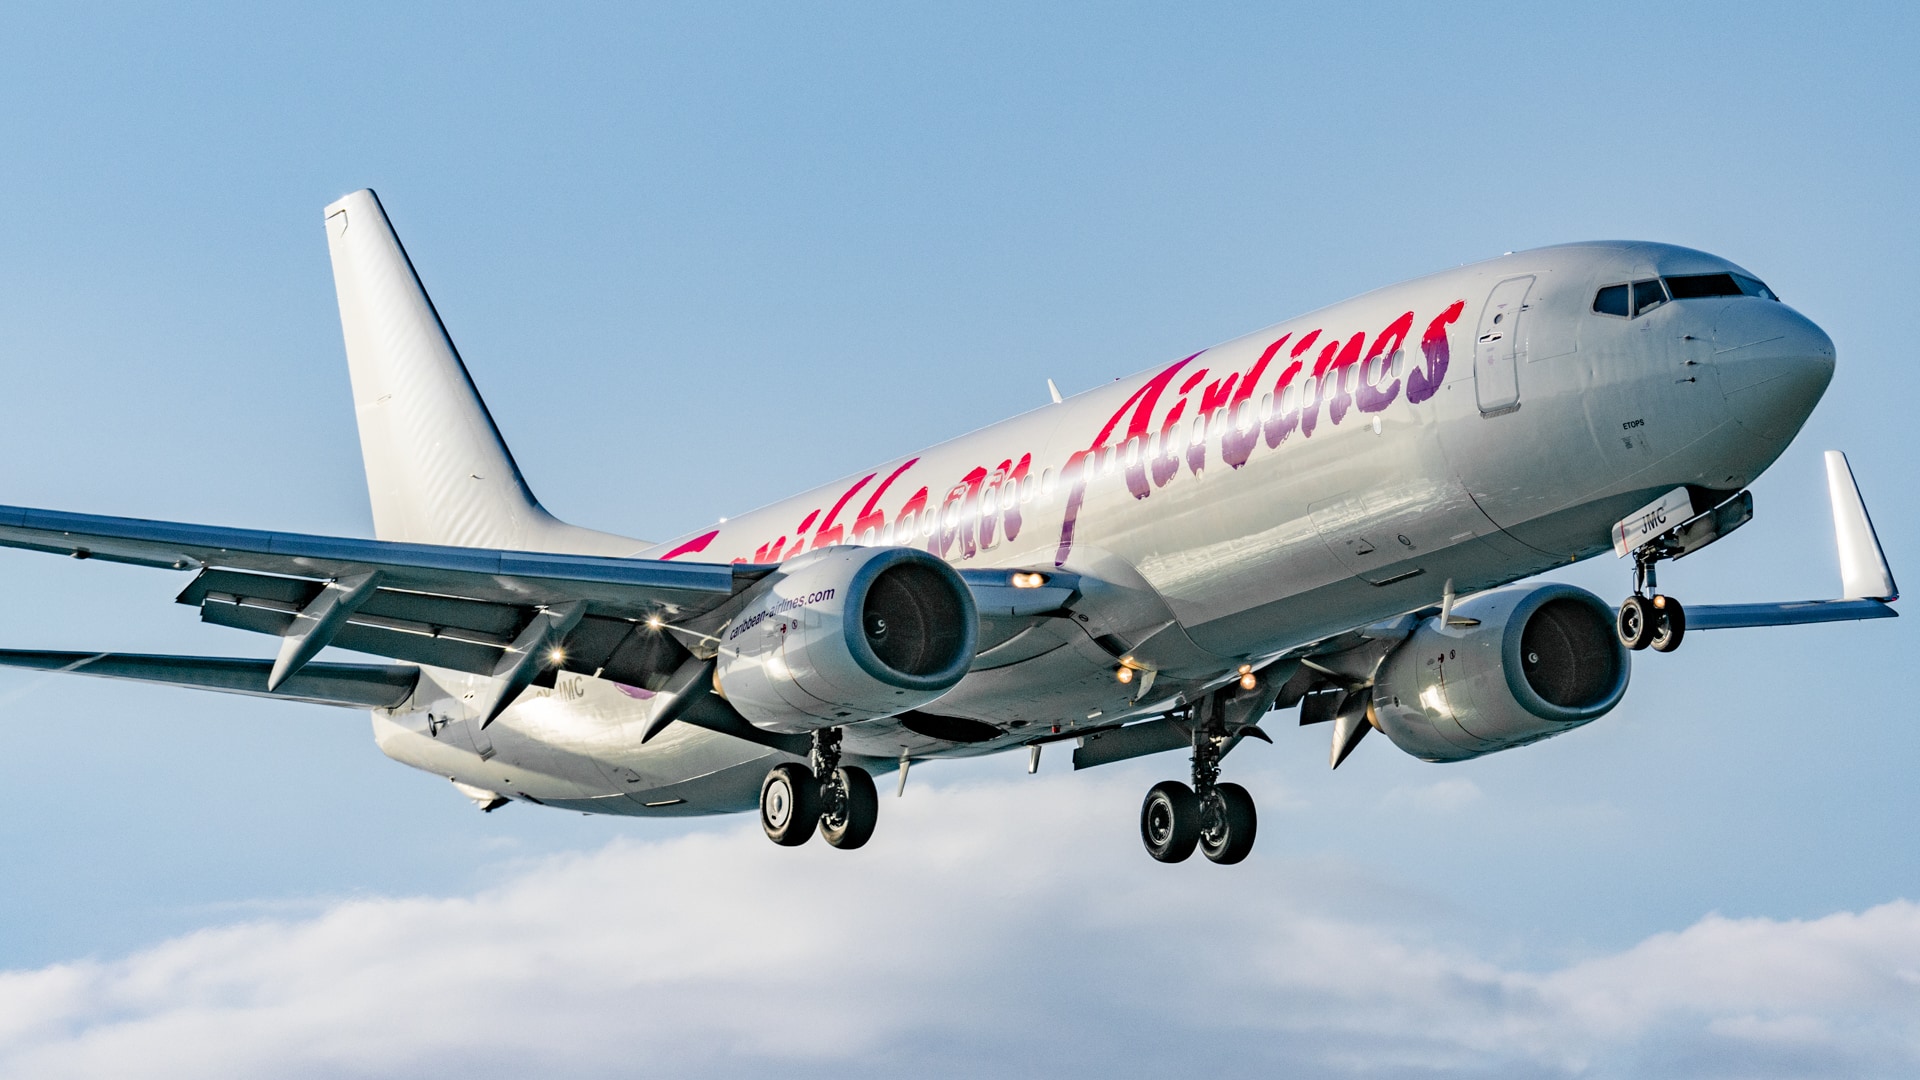 Caribbean Airlines plane taking off